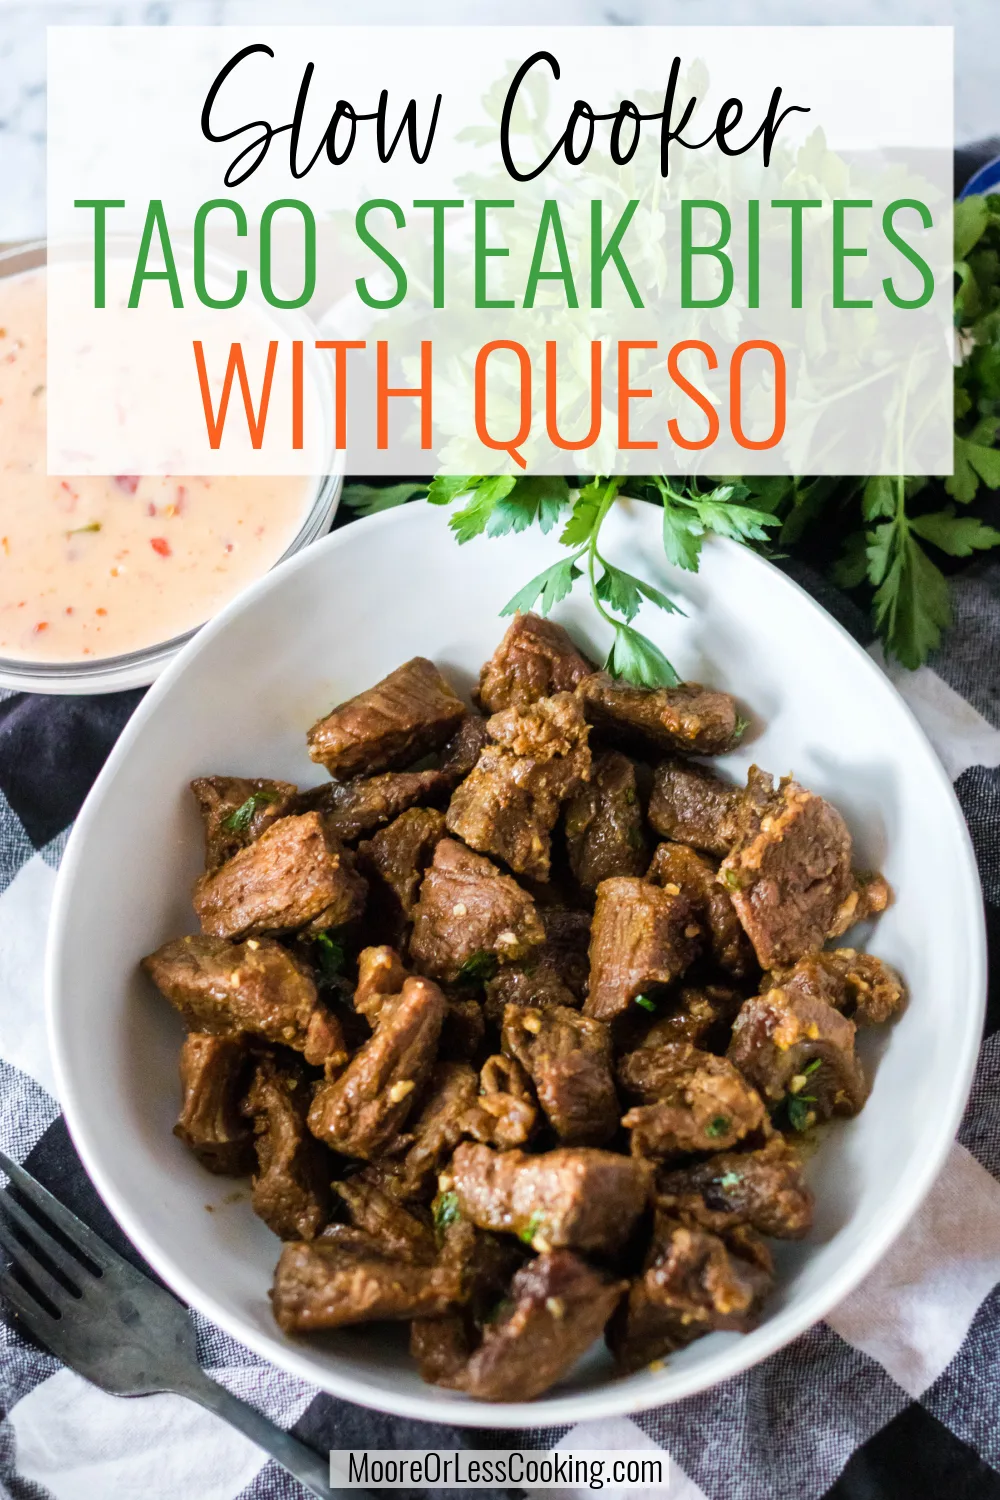 If you're looking for a tender and delicious beef appetizer, these Slow Cooker Taco Steak Bites with Queso couldn't be easier. Spicy Mexican-inspired flavors are infused by cooking the beef low and slow making them perfect for dipping in the warm and zesty queso. via @Mooreorlesscook